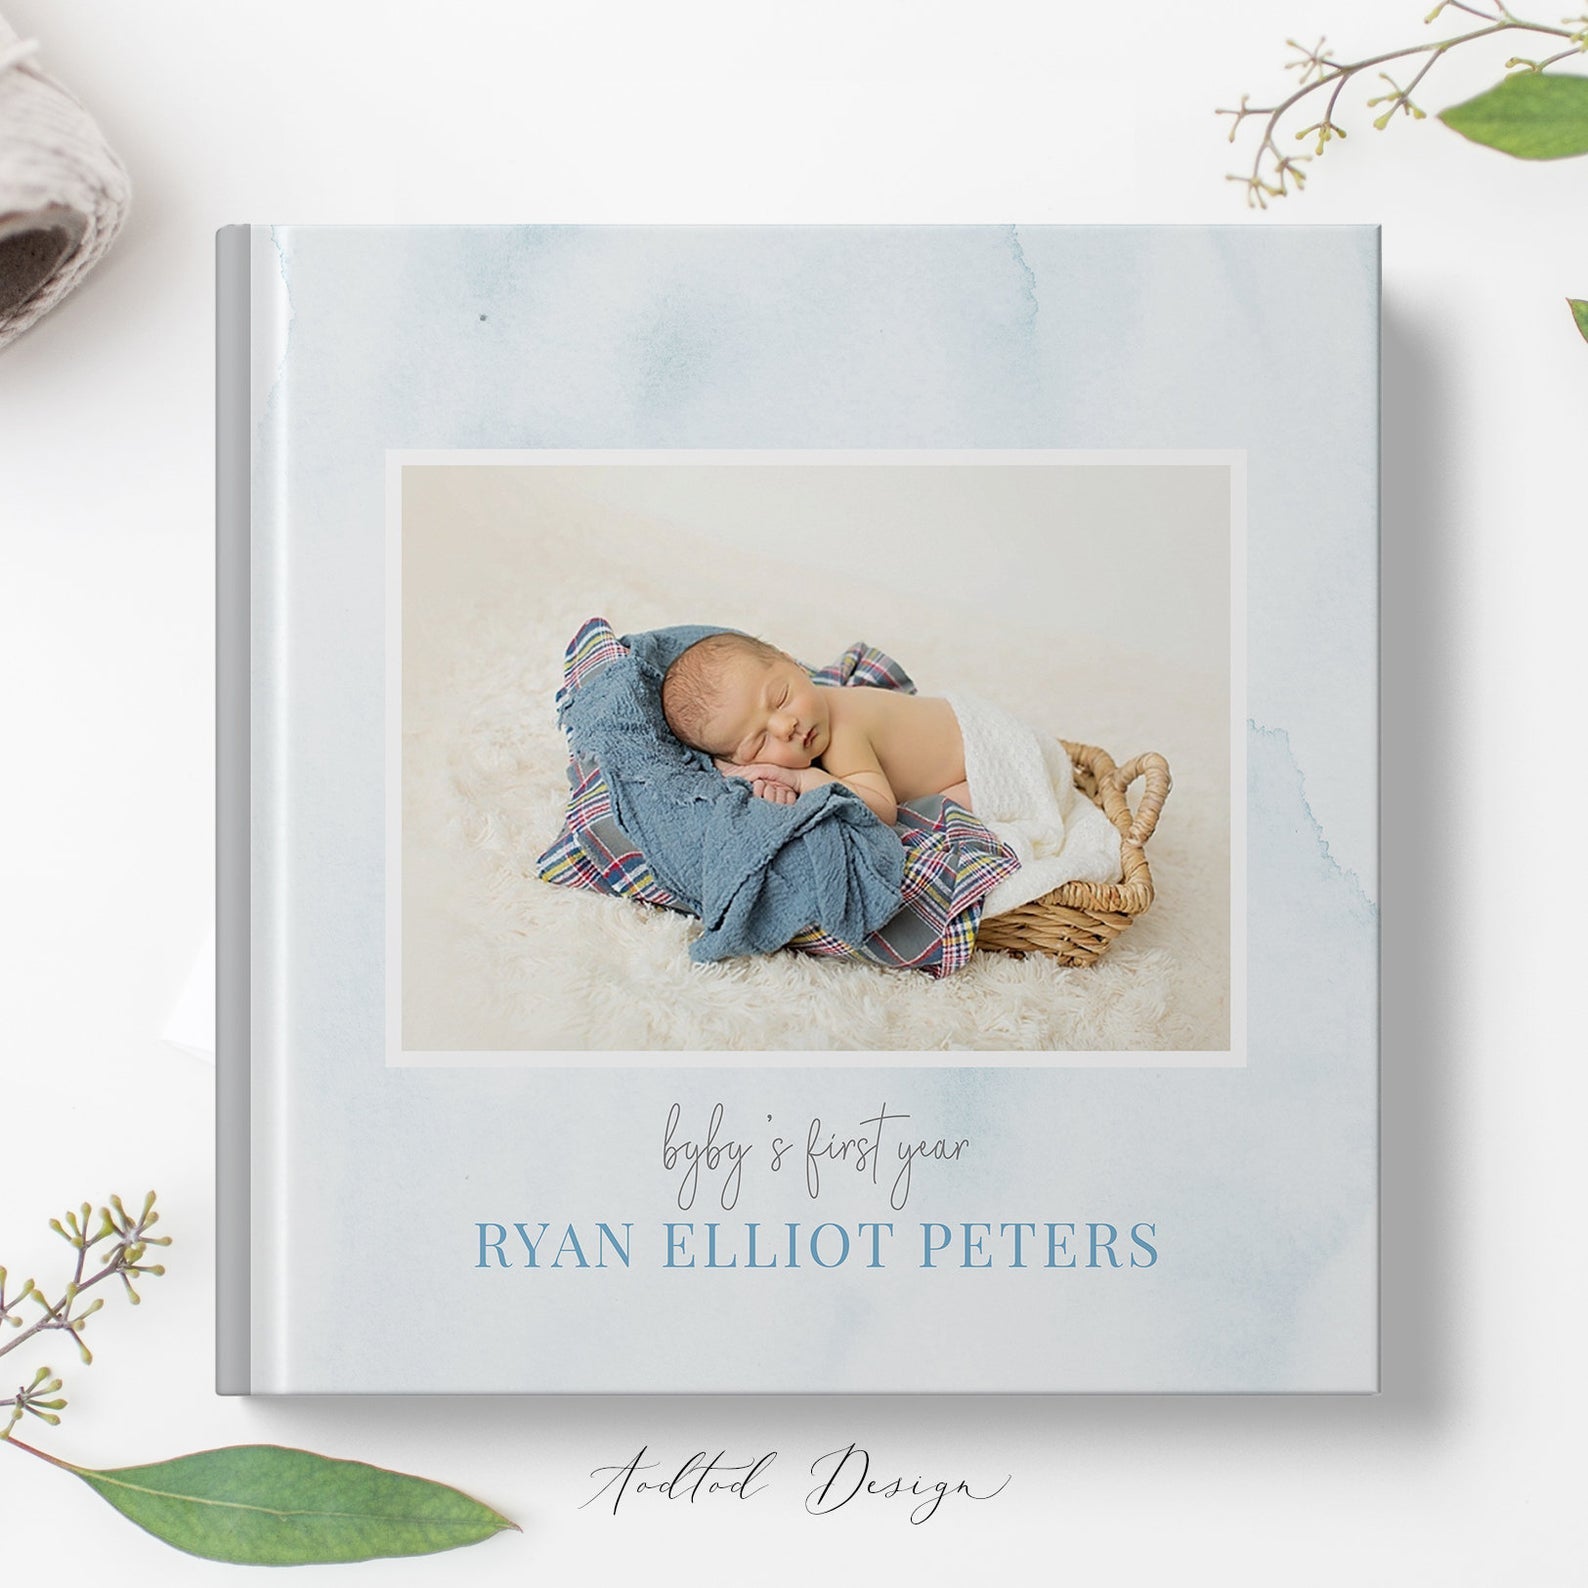 12x12 Baby Photo Book Template, Baby's First Year, New Newborn Photo Book  Album, Photography, Photoshop, PSD, Instant Download #Y20-A005-PSD